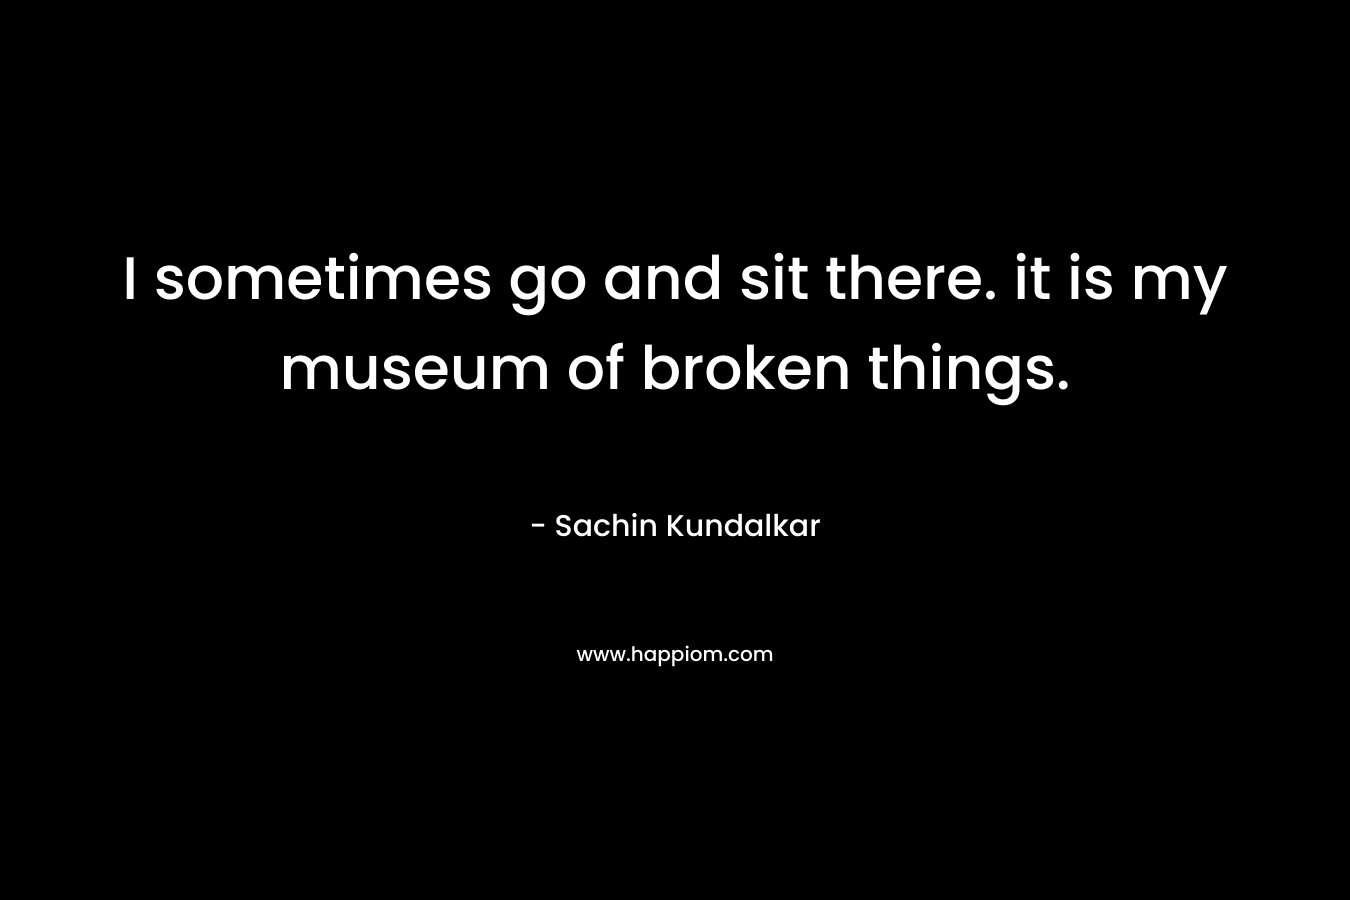 I sometimes go and sit there. it is my museum of broken things.